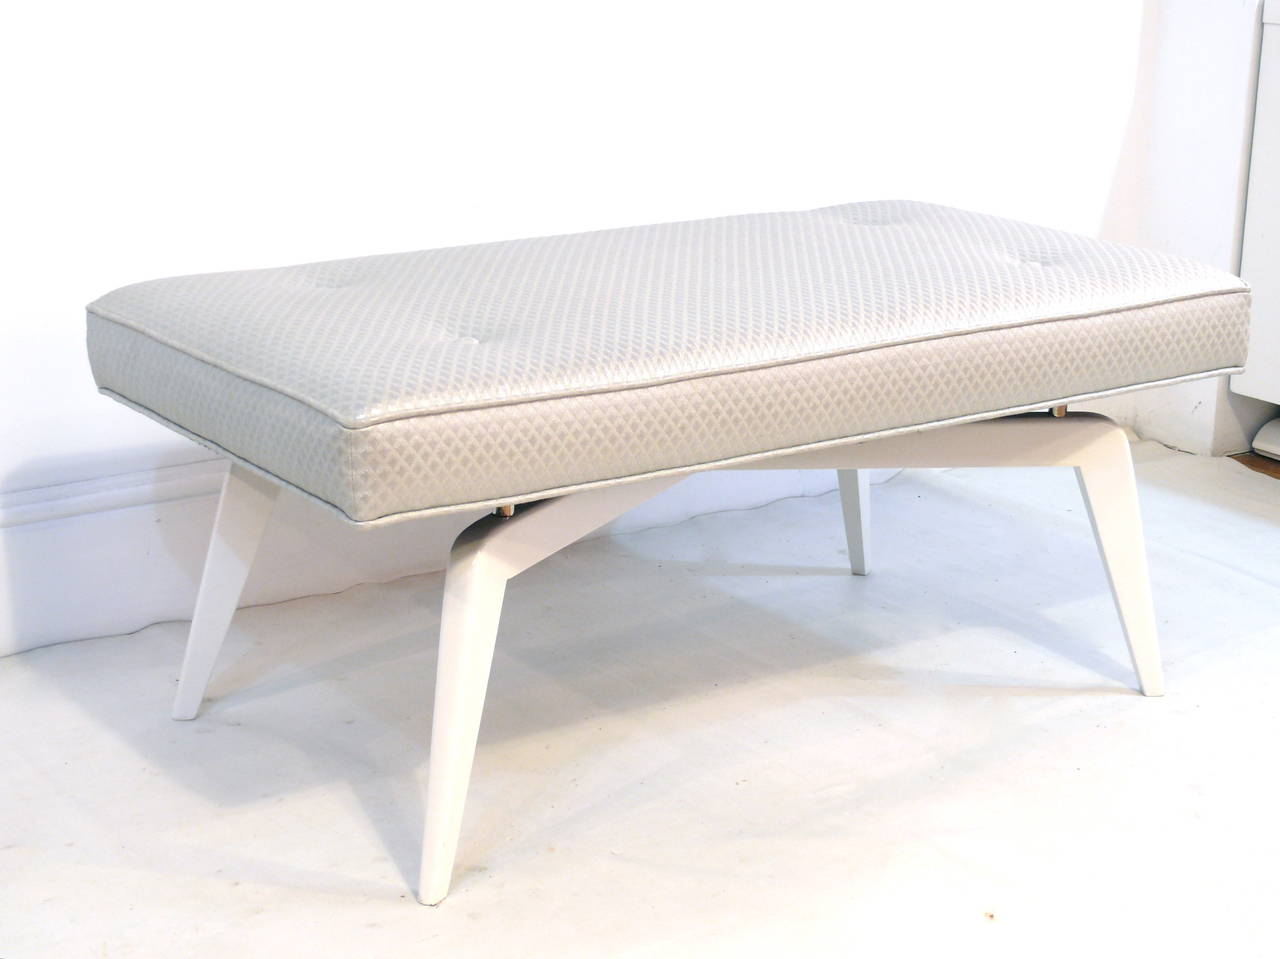 The elegantly appointed custom formation bench takes a step further. Designed by Irwin Feld design for CF modern, this evolved formation base boasts a clean and new sculptural 'X' shape. Shown here in a solid wood white lacquered base, custom nickel